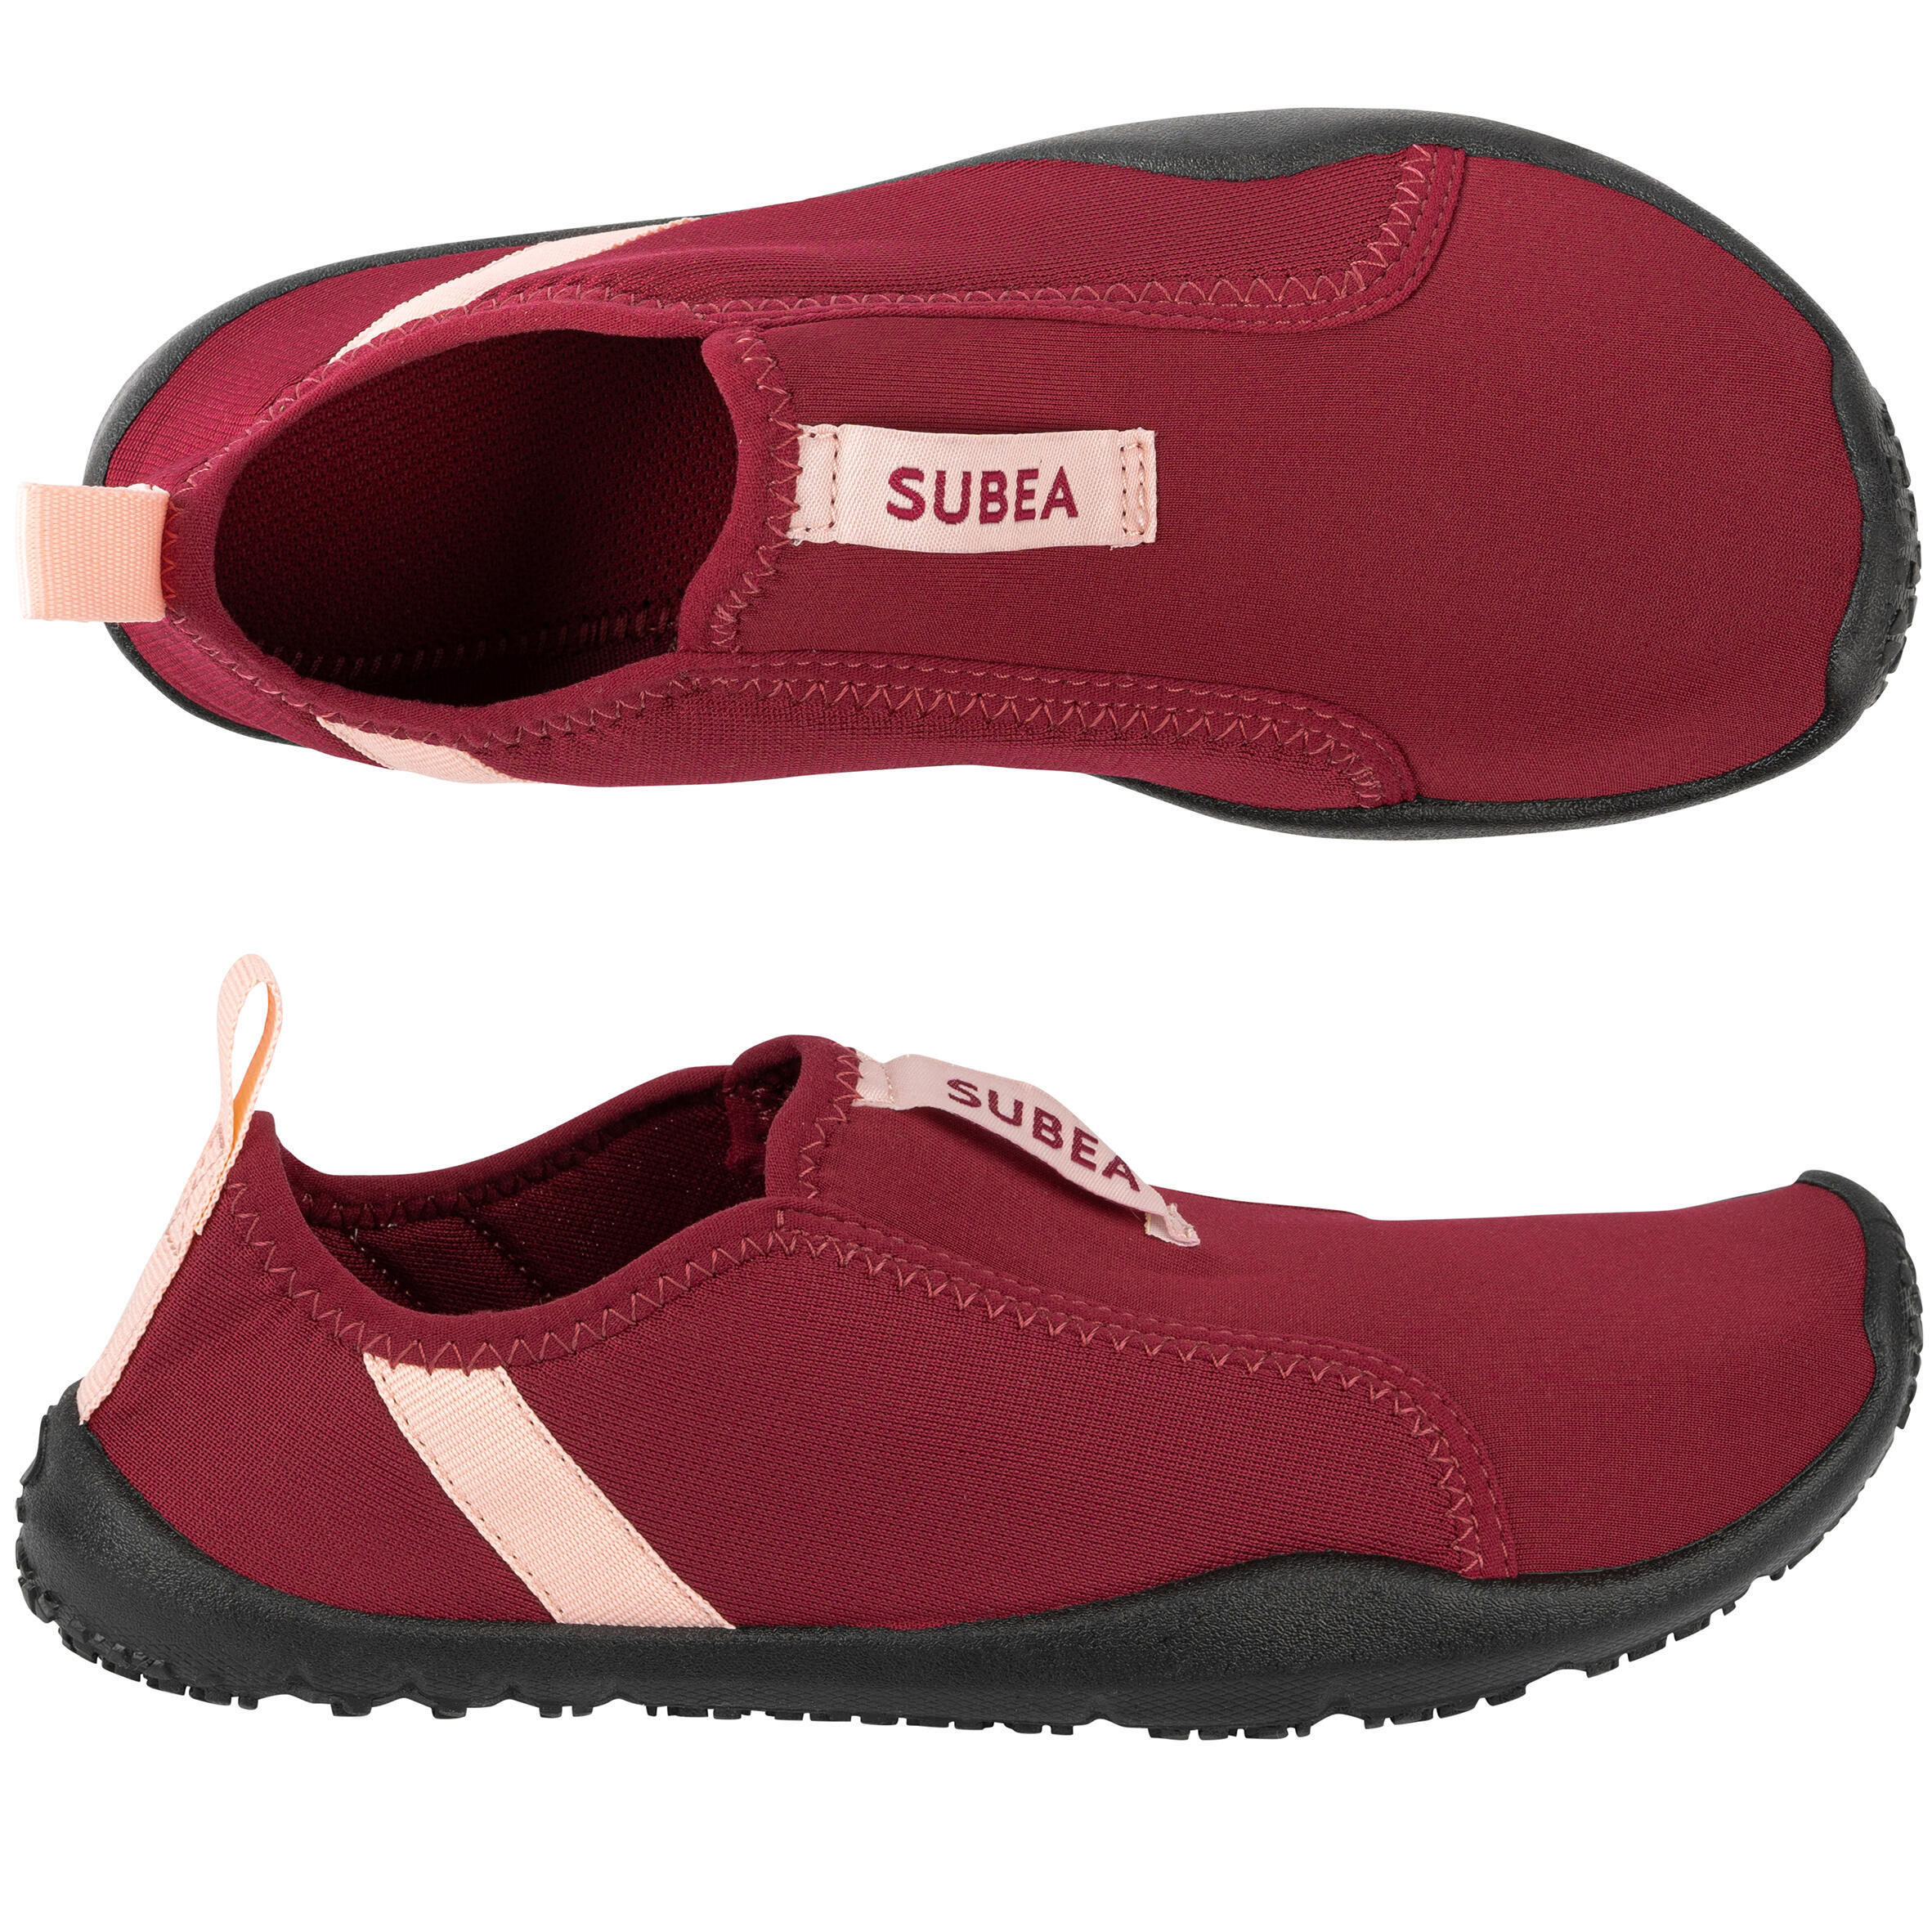 Adult Elasticated Water Shoes Aquashoes 120 - Red 2/14